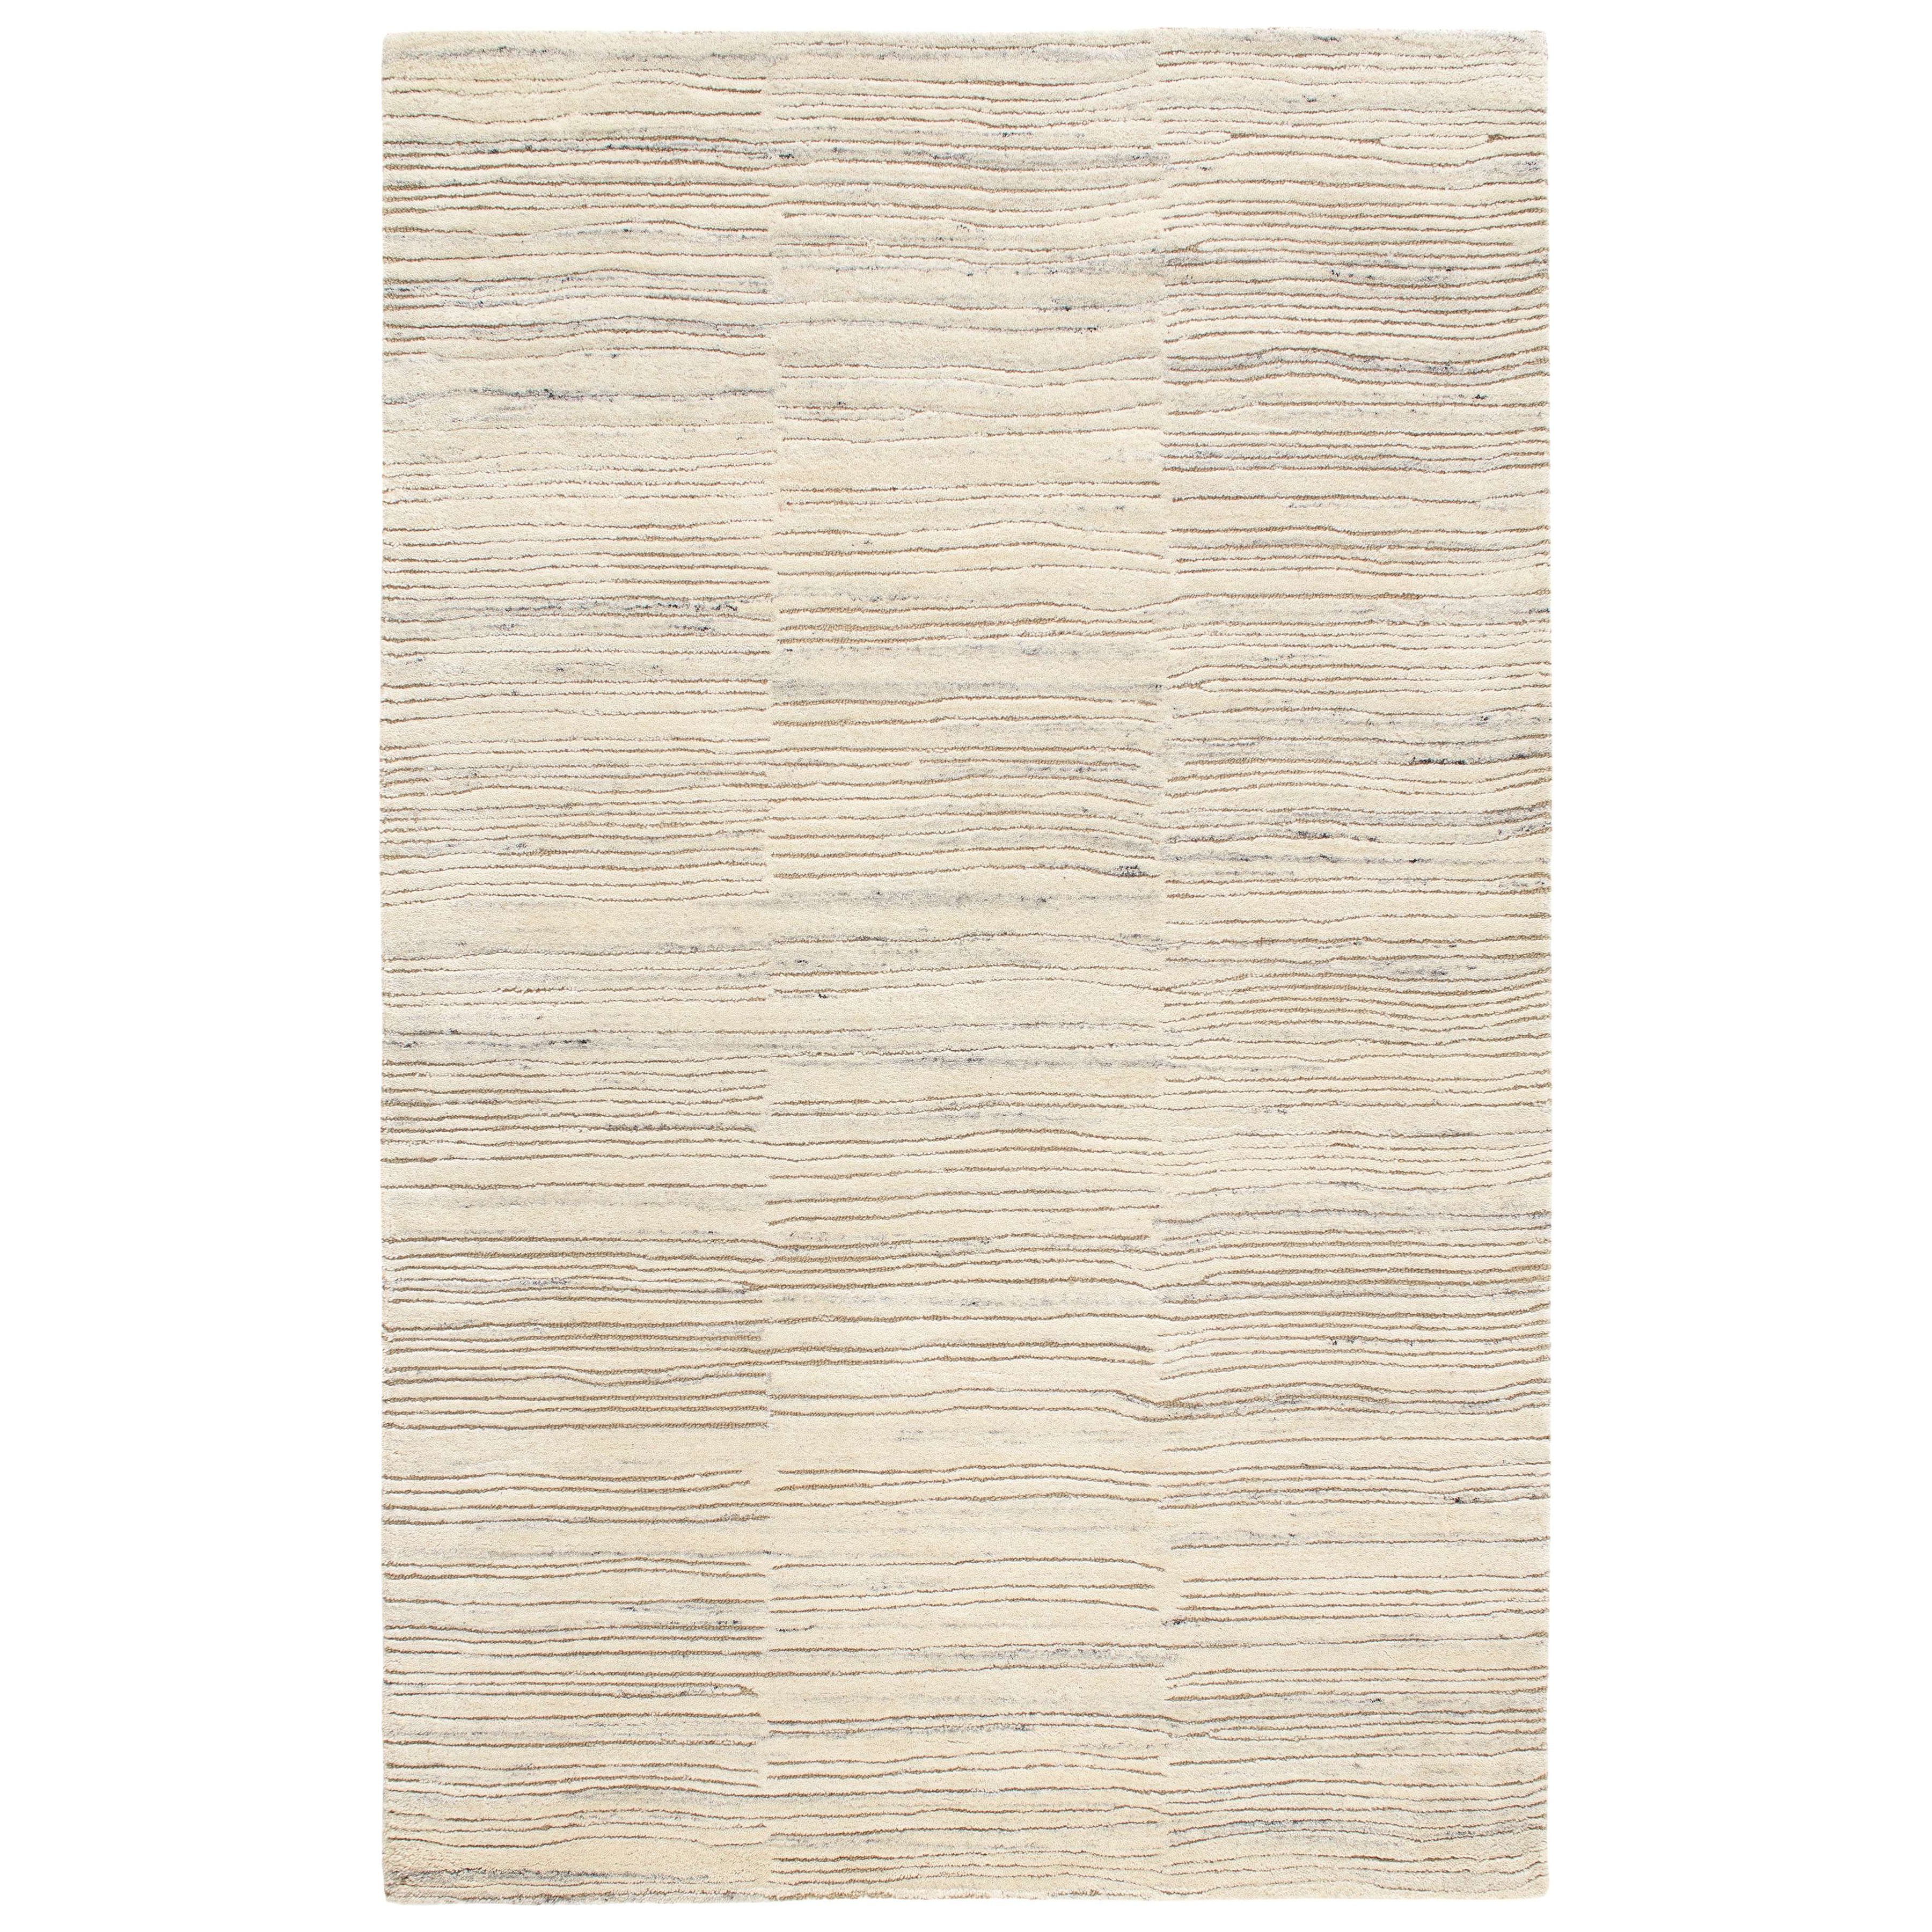 Inspired by substrate layers of sandstone sediments that chronicle the millennia, this luxurious, irregularly striped wool rug will stand the test of time. The subtle degradations of a natural undyed fleece pile enhance the finely observed irregular striping in a softly mineral palette. The subtle beauty of the higher sheared tufts emphasizes the contrast of the densely looped stripes. Amethyst Home provides interior design, new construction, custom furniture, and area rugs in the Newport Beach metro area.